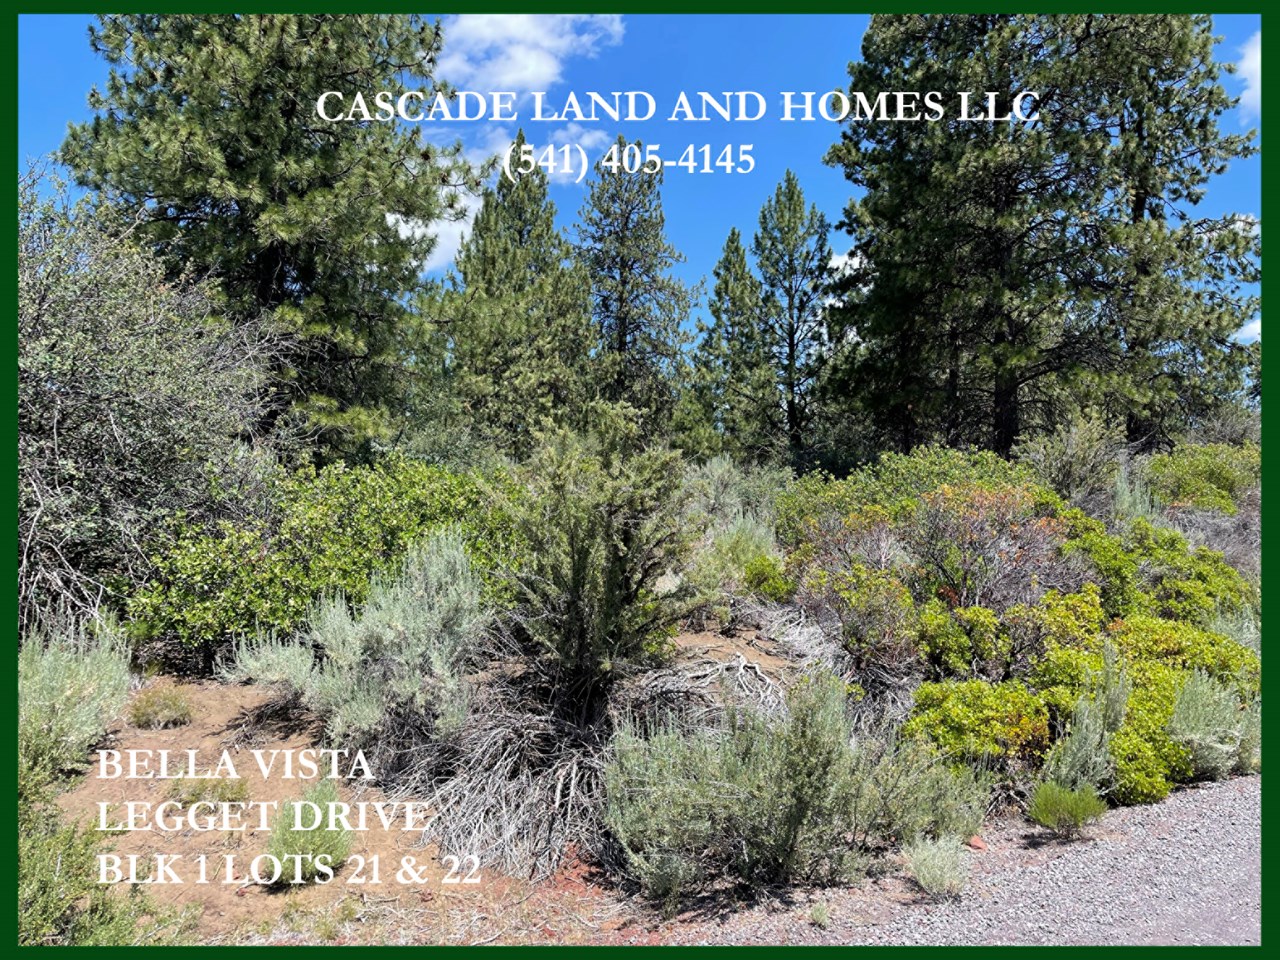 the opportunity to purchase two adjoining parcels together doesn't happen very often, take advantage of this chance to have a large property at beautiful agency lake!